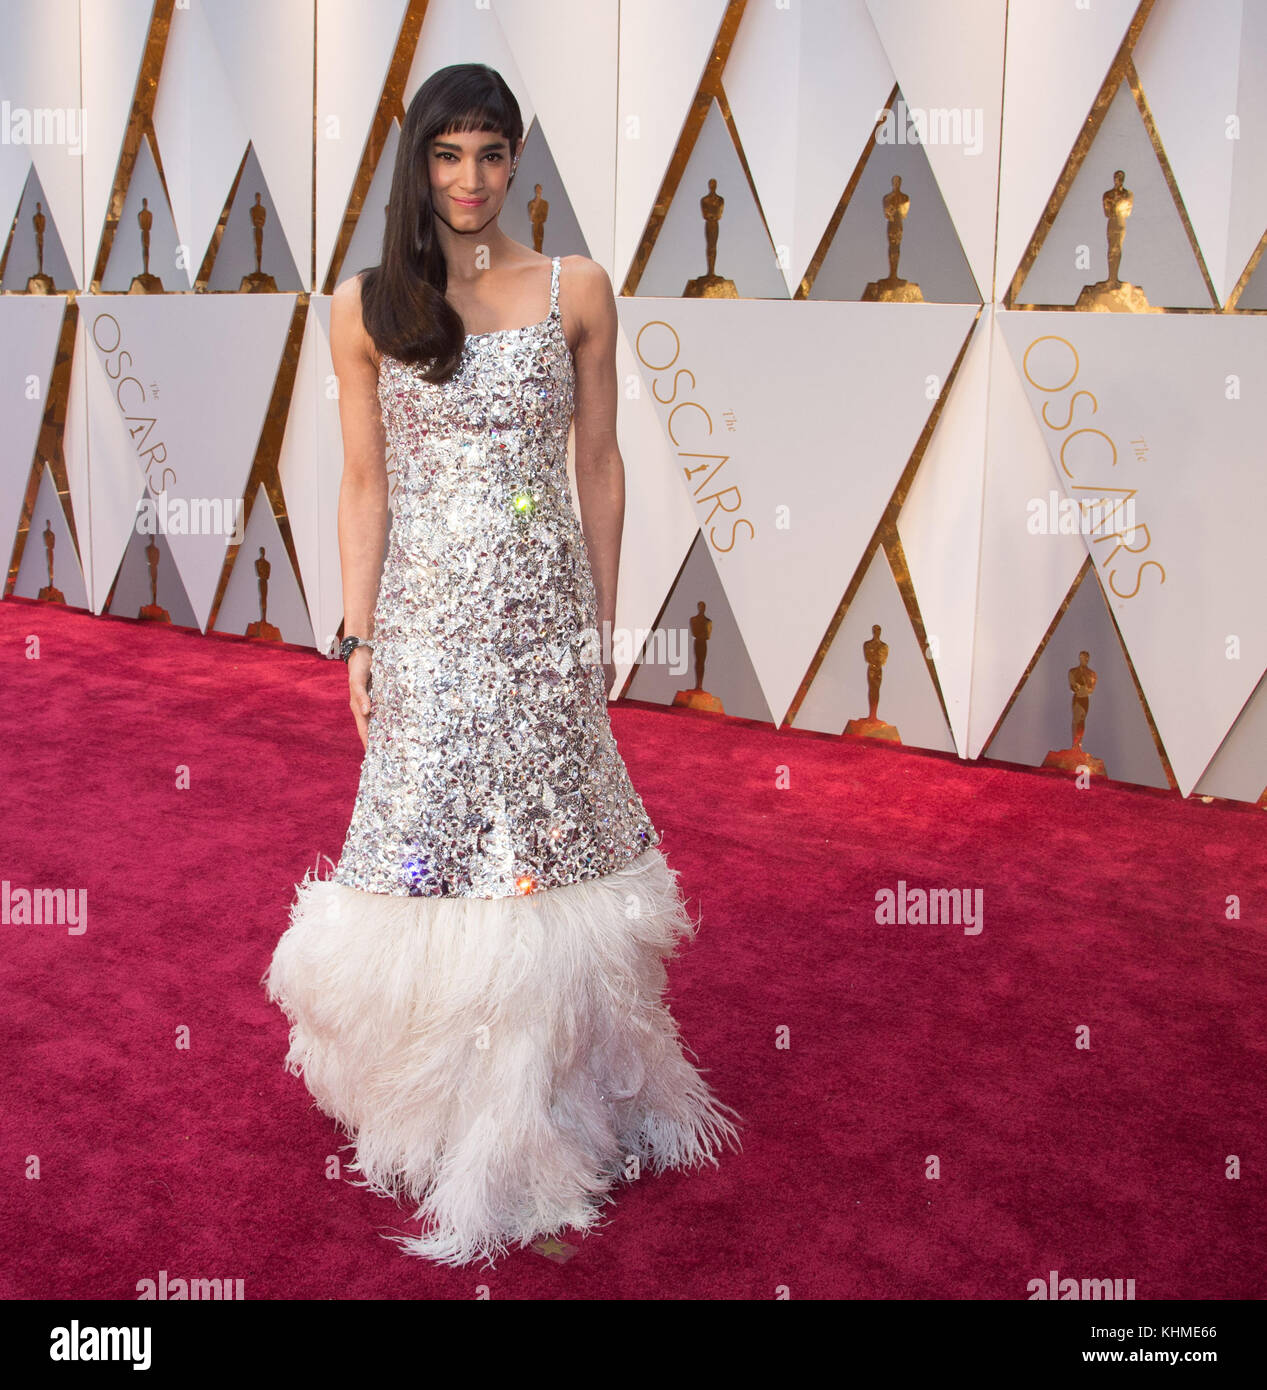 HOLLYWOOD, CA - FEBRUARY 26: Sofia Boutella attends the 89th Annual Academy Awards at Hollywood & Highland Center on February 26, 2017 in Hollywood, California  People:  Sofia Boutella  Transmission Ref:  MNC Stock Photo